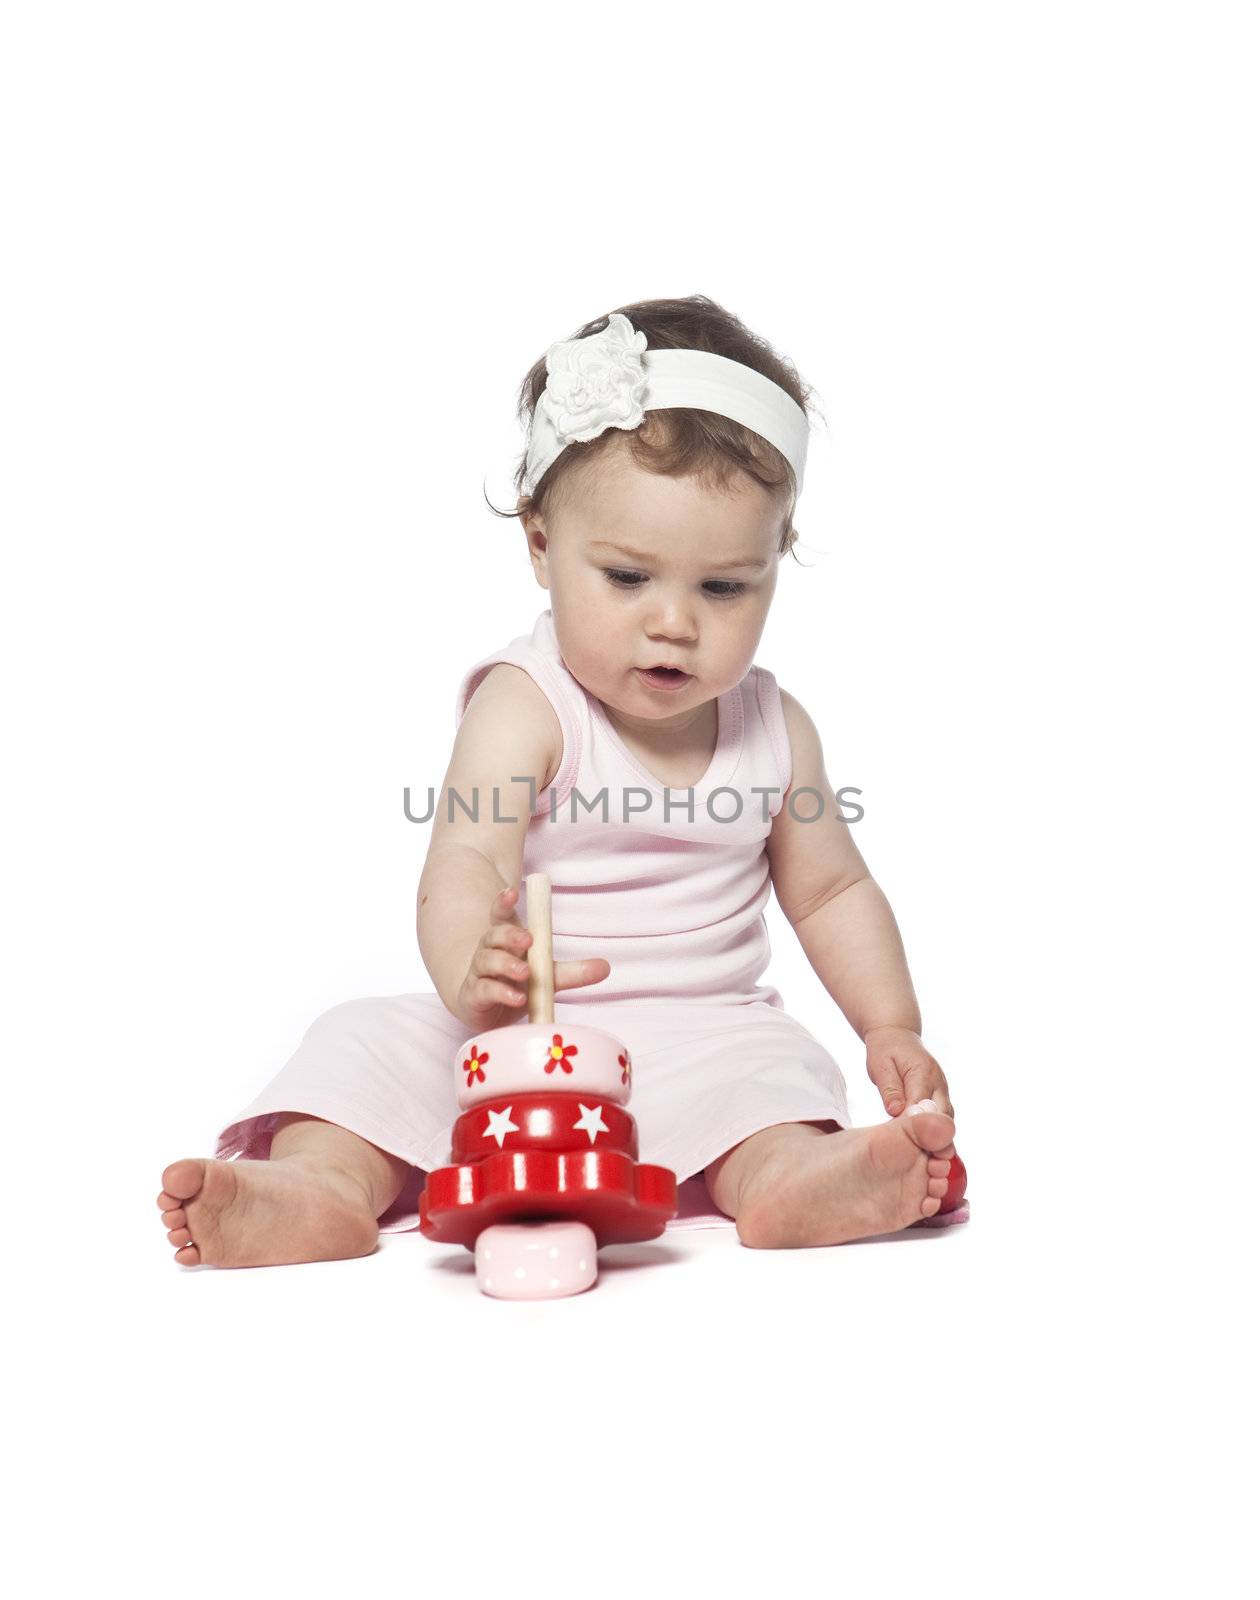 Baby in pink clothes playing with a red toy by gemenacom